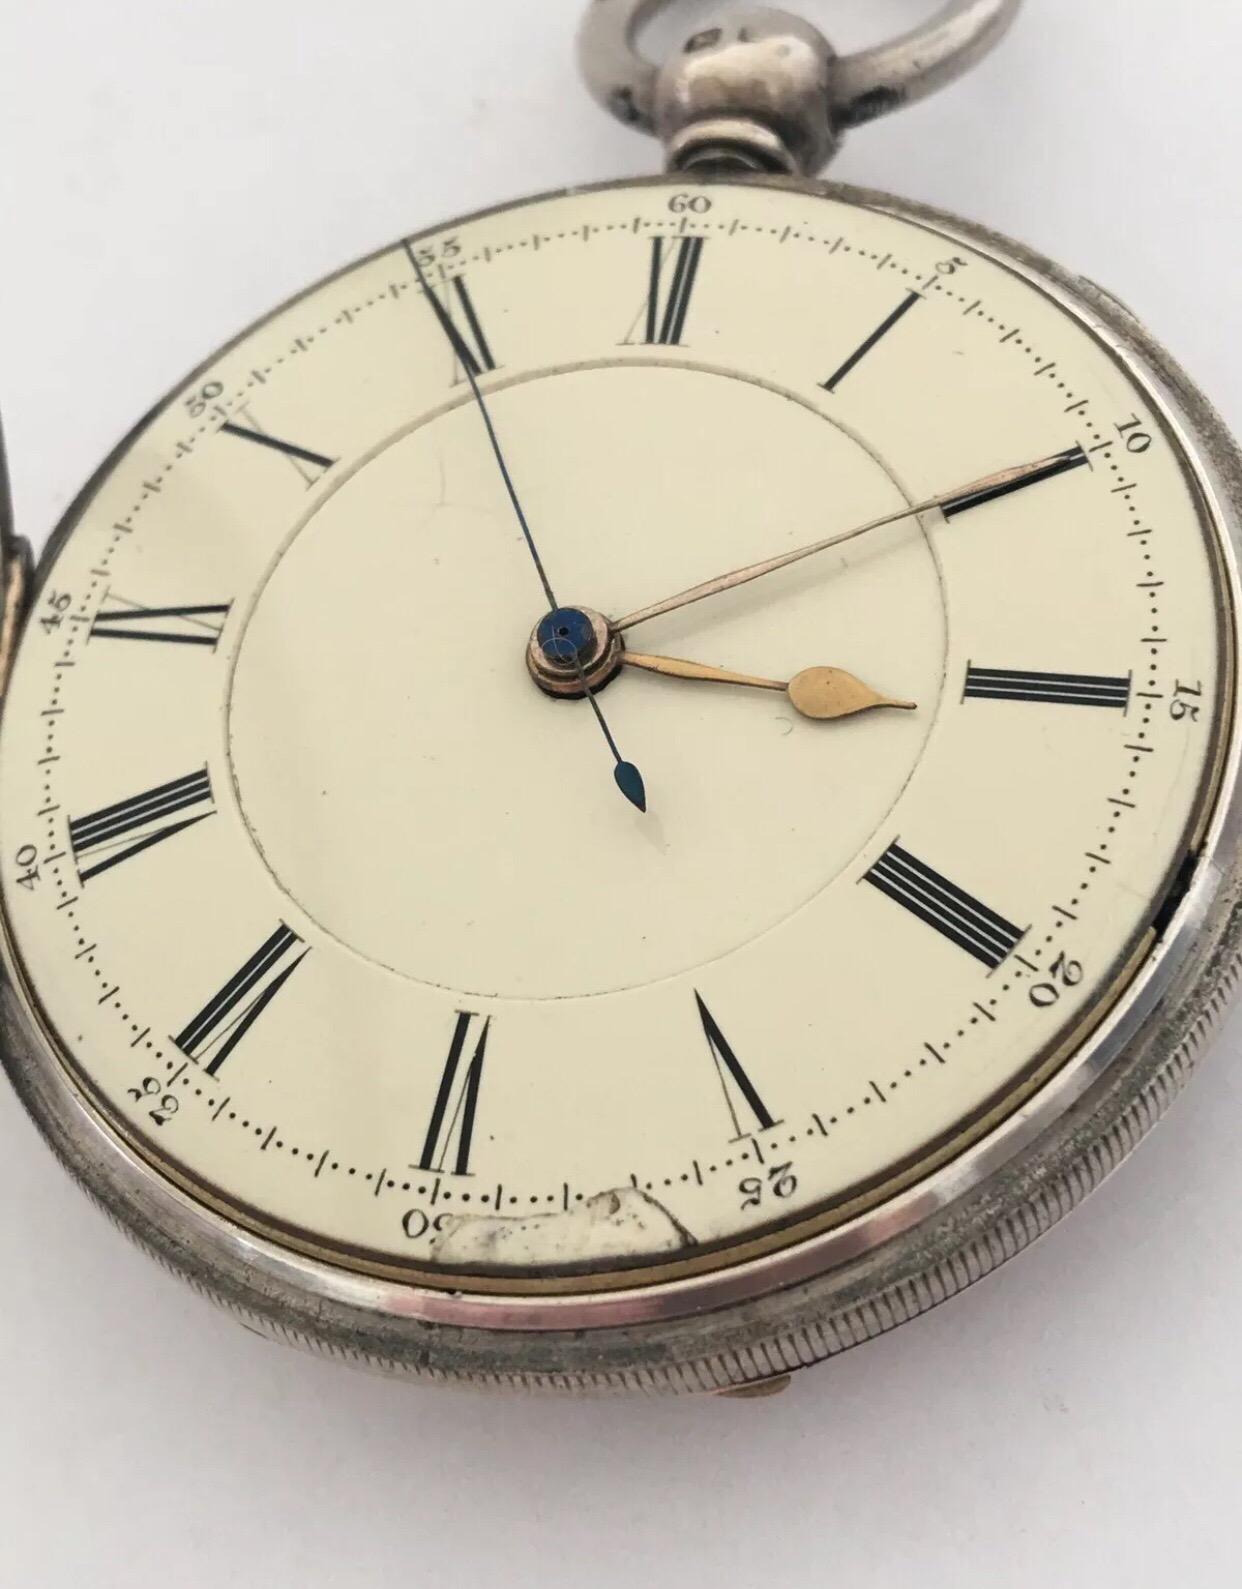 Early & Rare English Lever Centre Seconds Chronograph Silver Pocket Watch For Sale 6